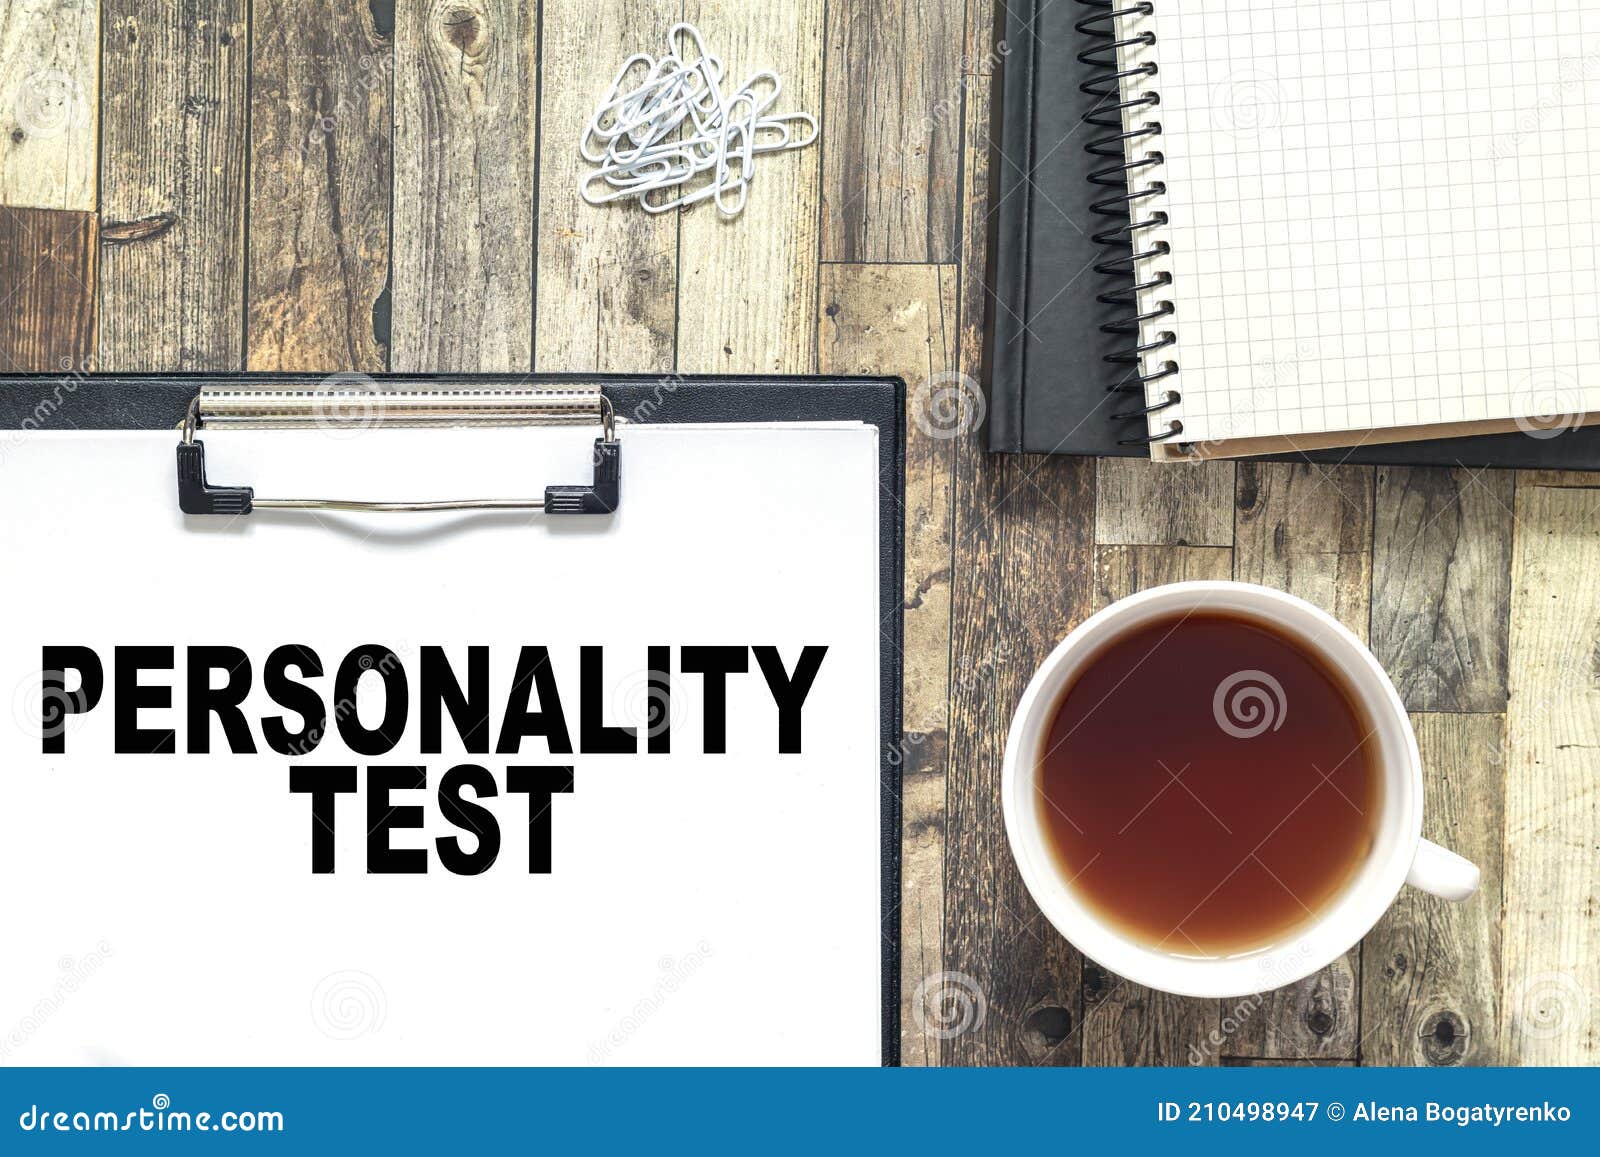 Test personality the office Here's The